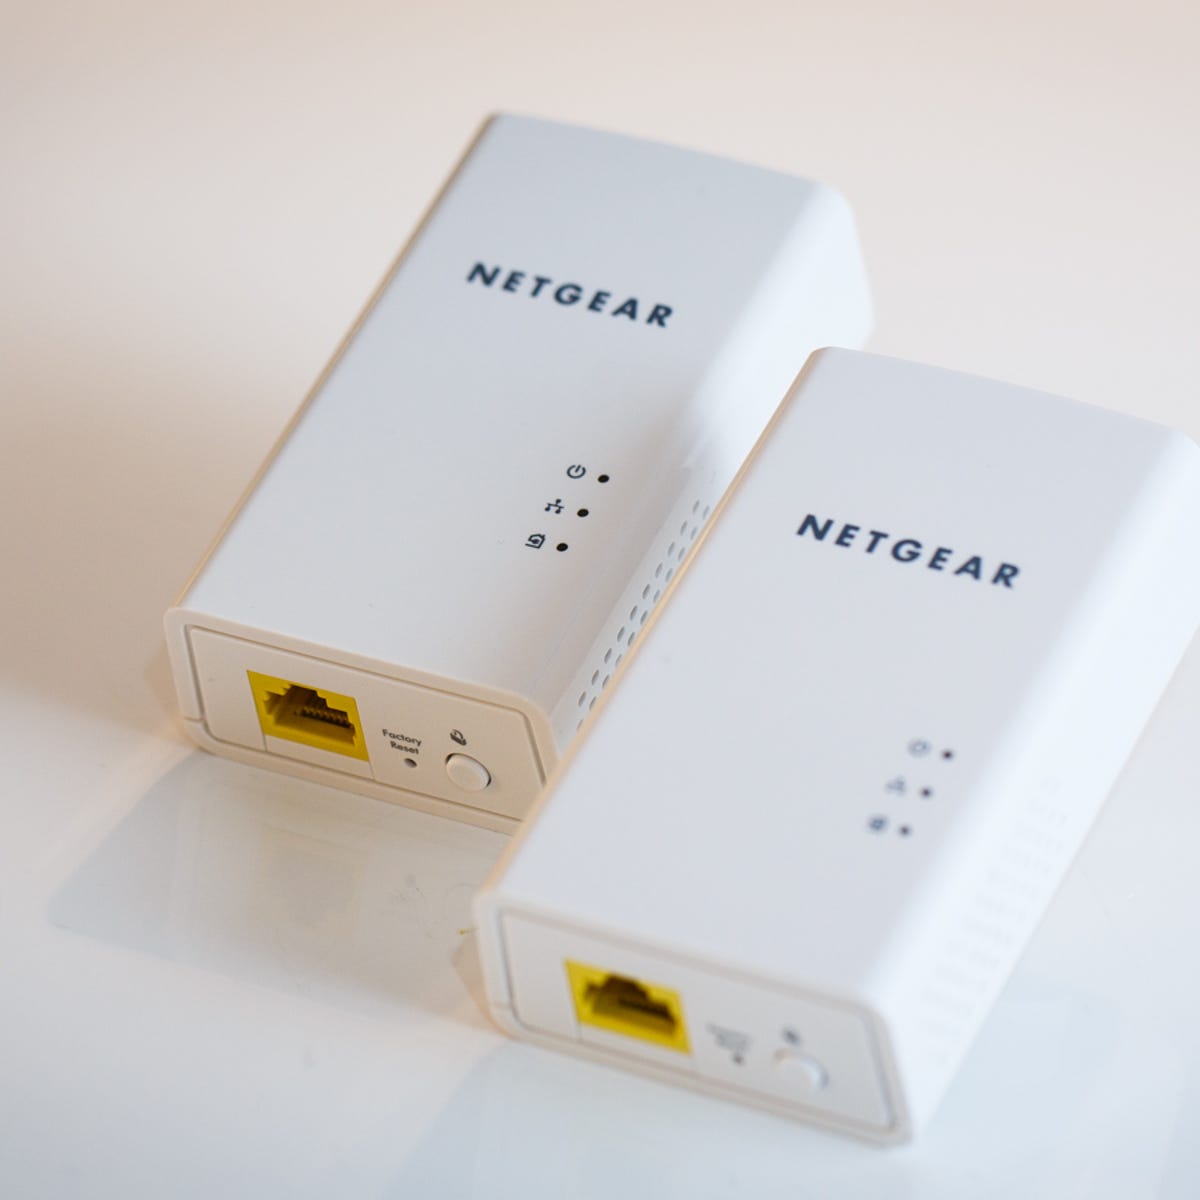 Netgear Powerline 1200 review: Top power line speed at a low cost - CNET